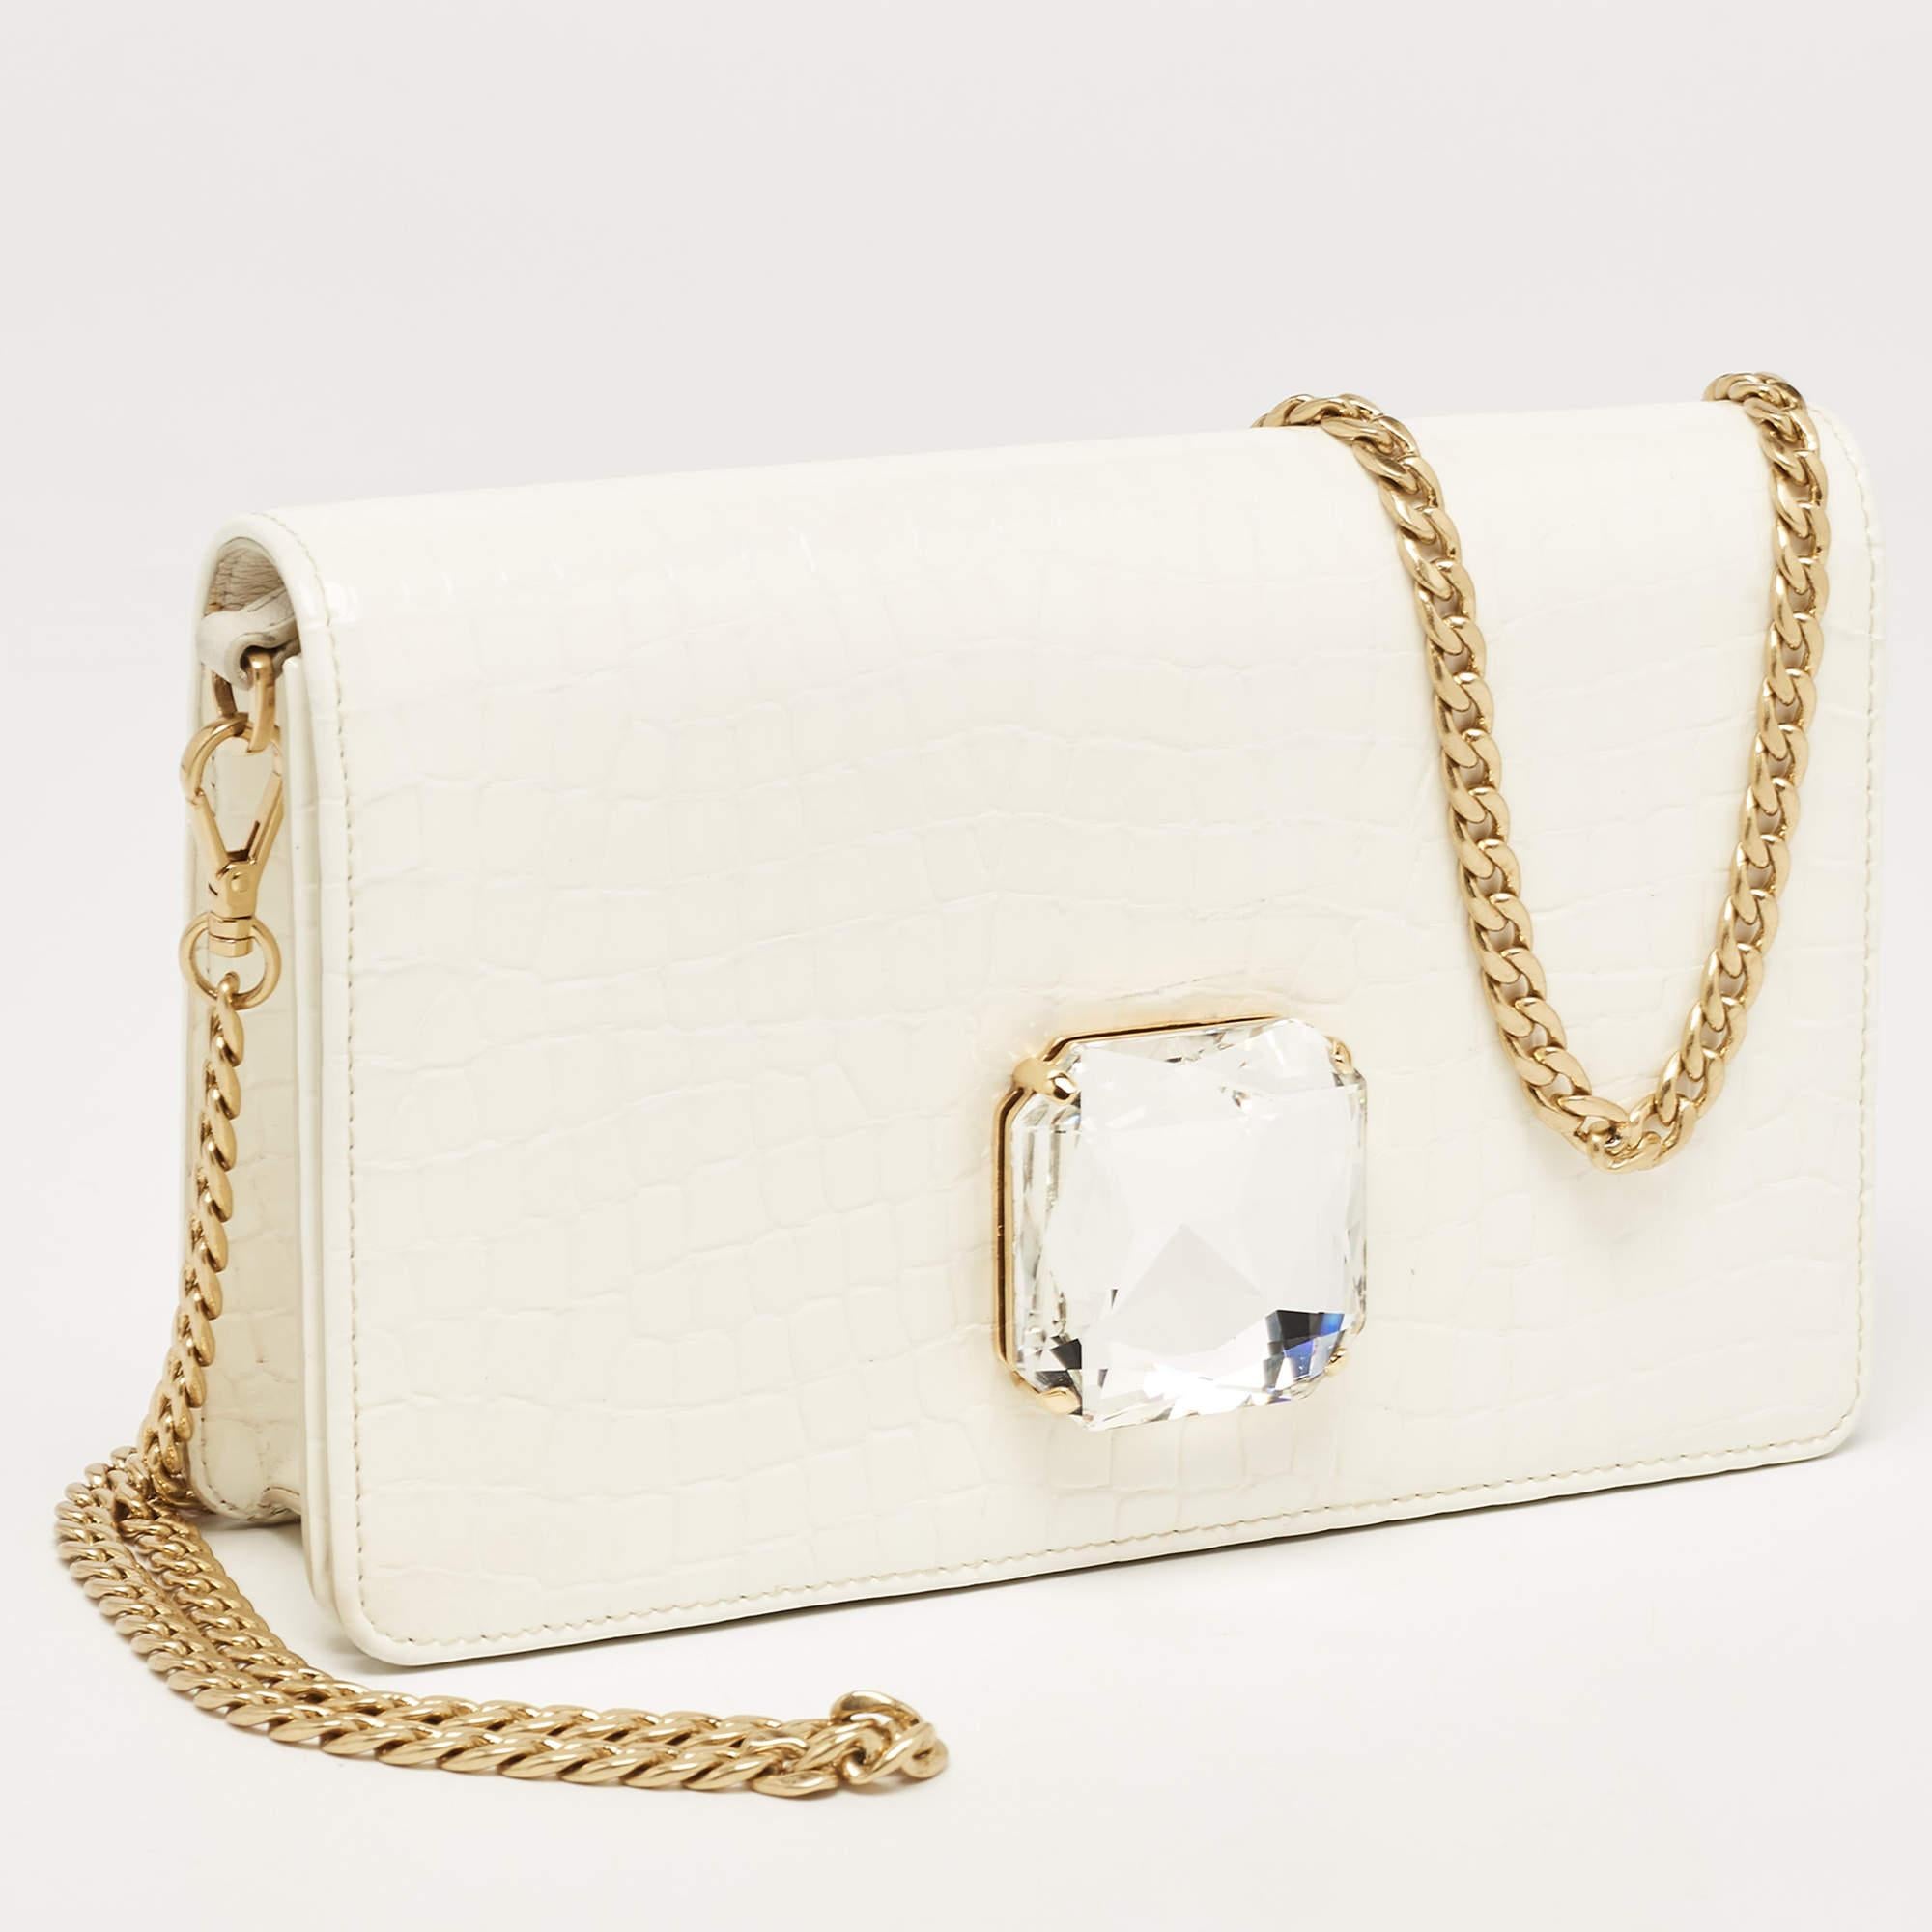 Miu Miu Off White Croc Embossed Leather Crystal Embellished Chain Clutch 6